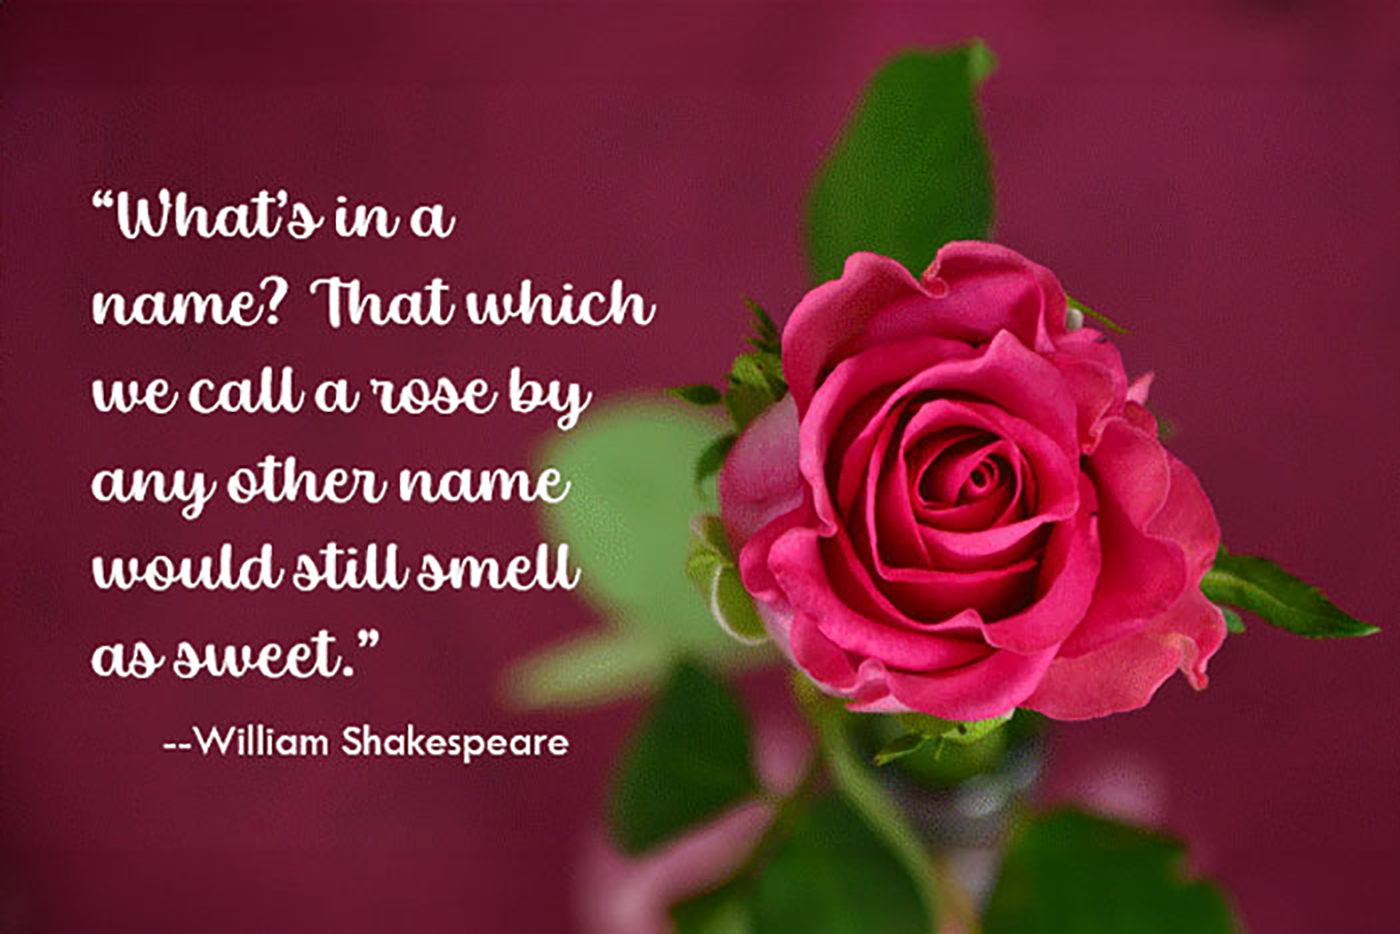 What's in a name? That which we call a rose, by any other word would smell as sweet. - William Shakespeare. A rose next to text on a red background